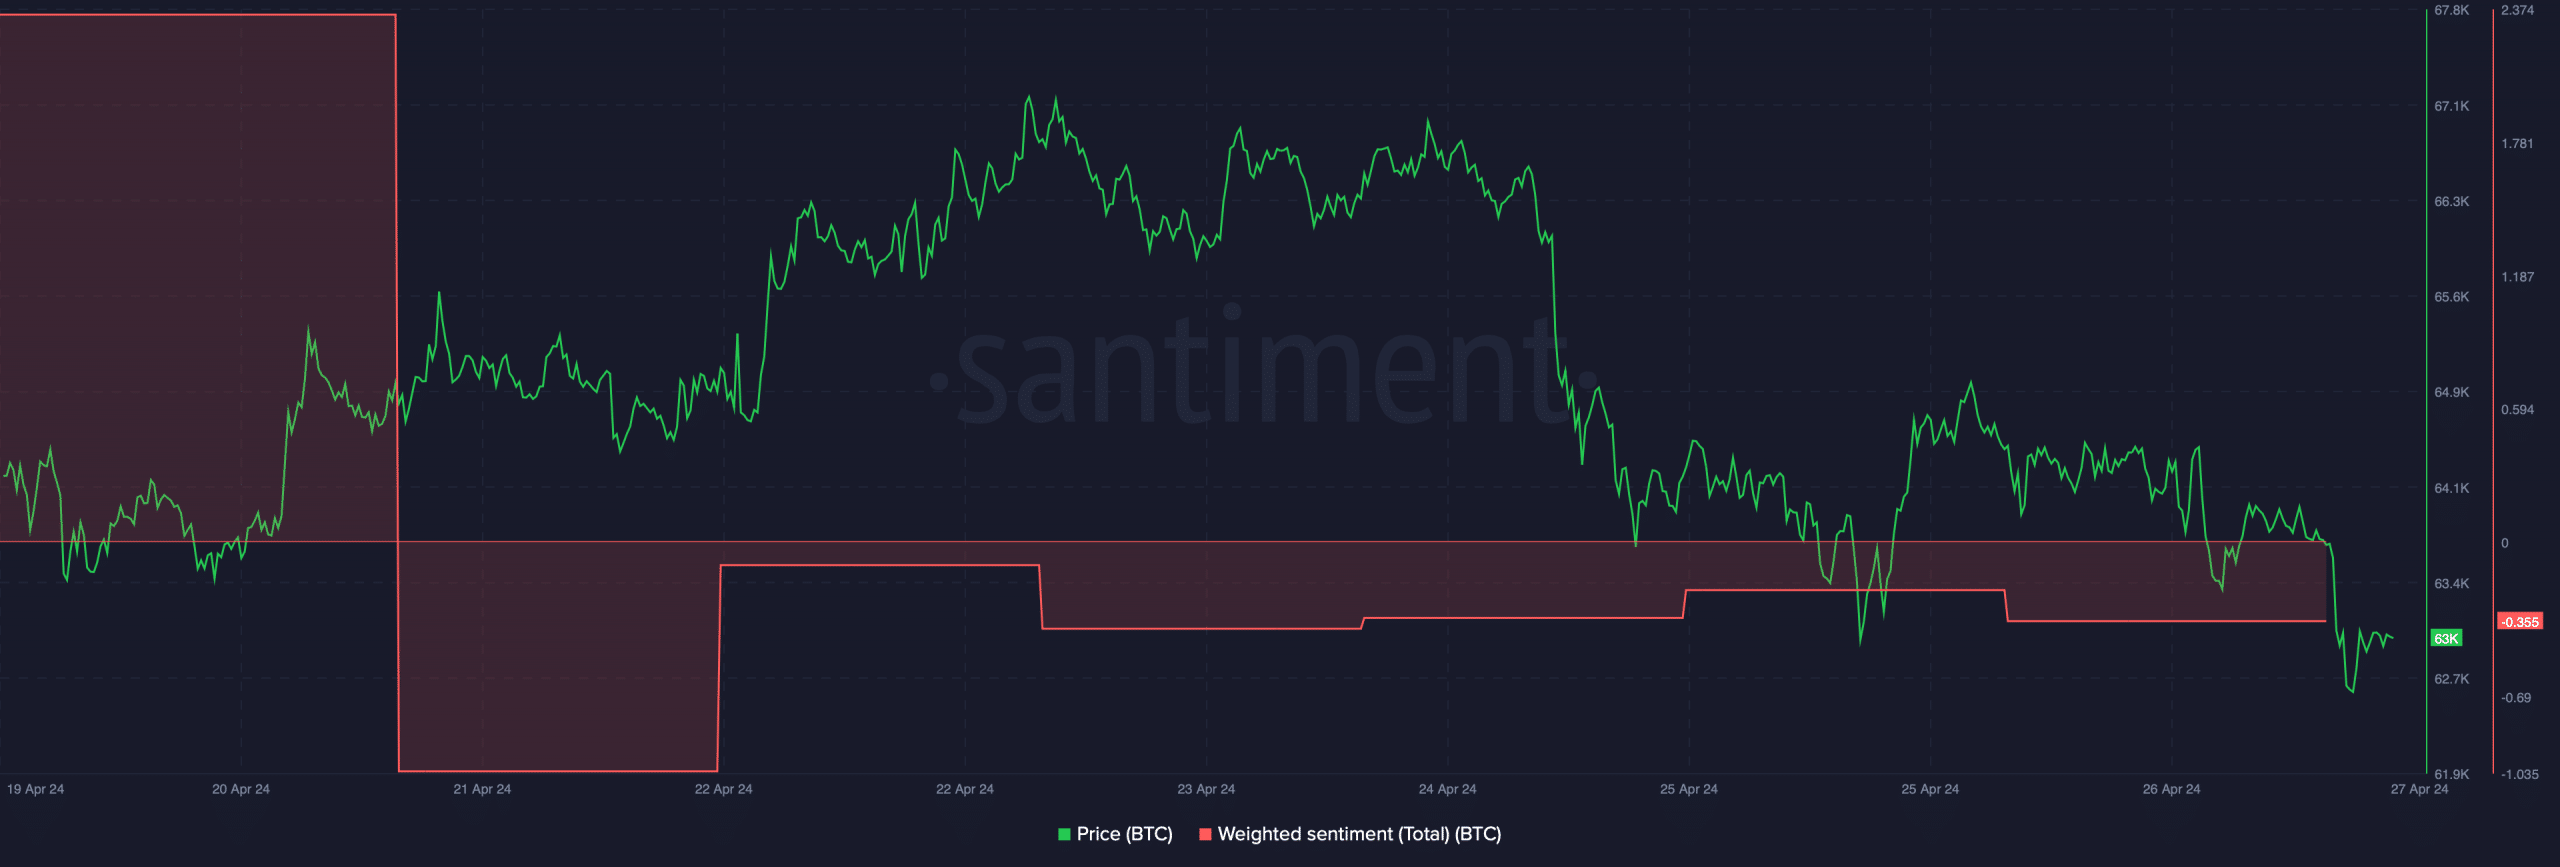 Weighted Bitcoin Sentiment Falls